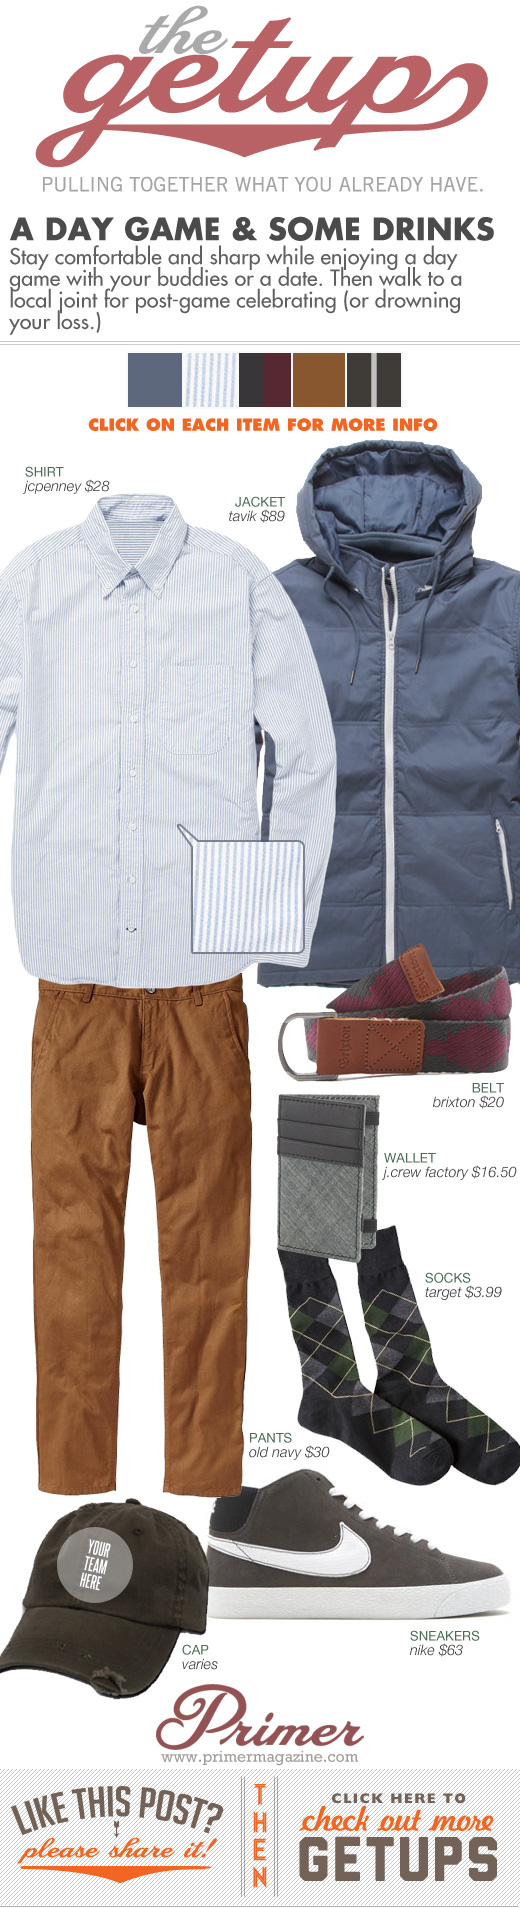 Getup A Day Game and some Drinks - Nylon jacket, striped shirt, brown pants